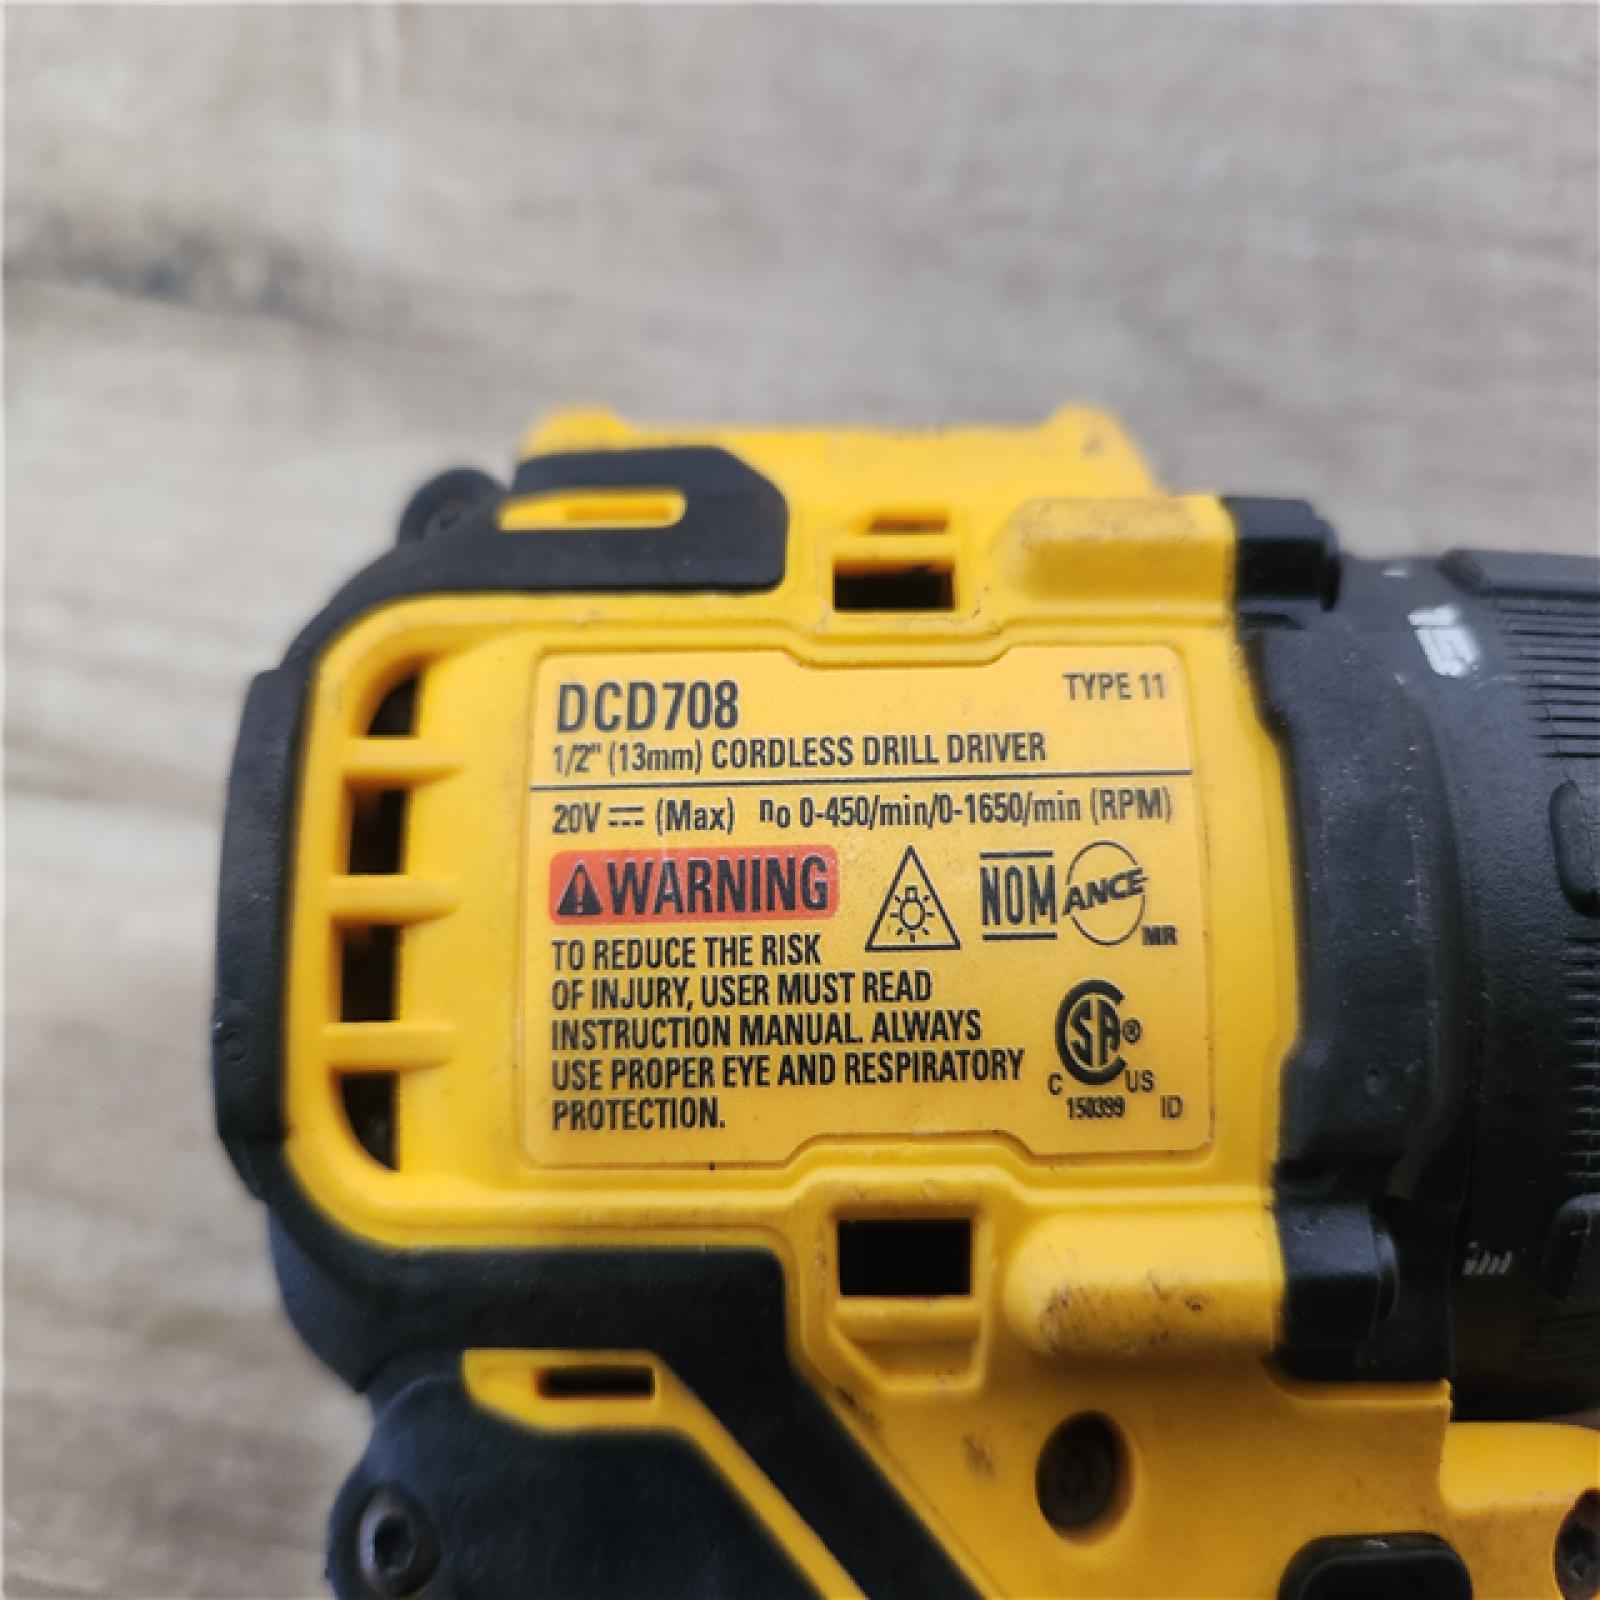 Phoenix Location NEW DEWALT ATOMIC 20-Volt Lithium-Ion Cordless 1/2 in. Compact Hammer Drill with 3.0Ah Battery, Charger and Bag